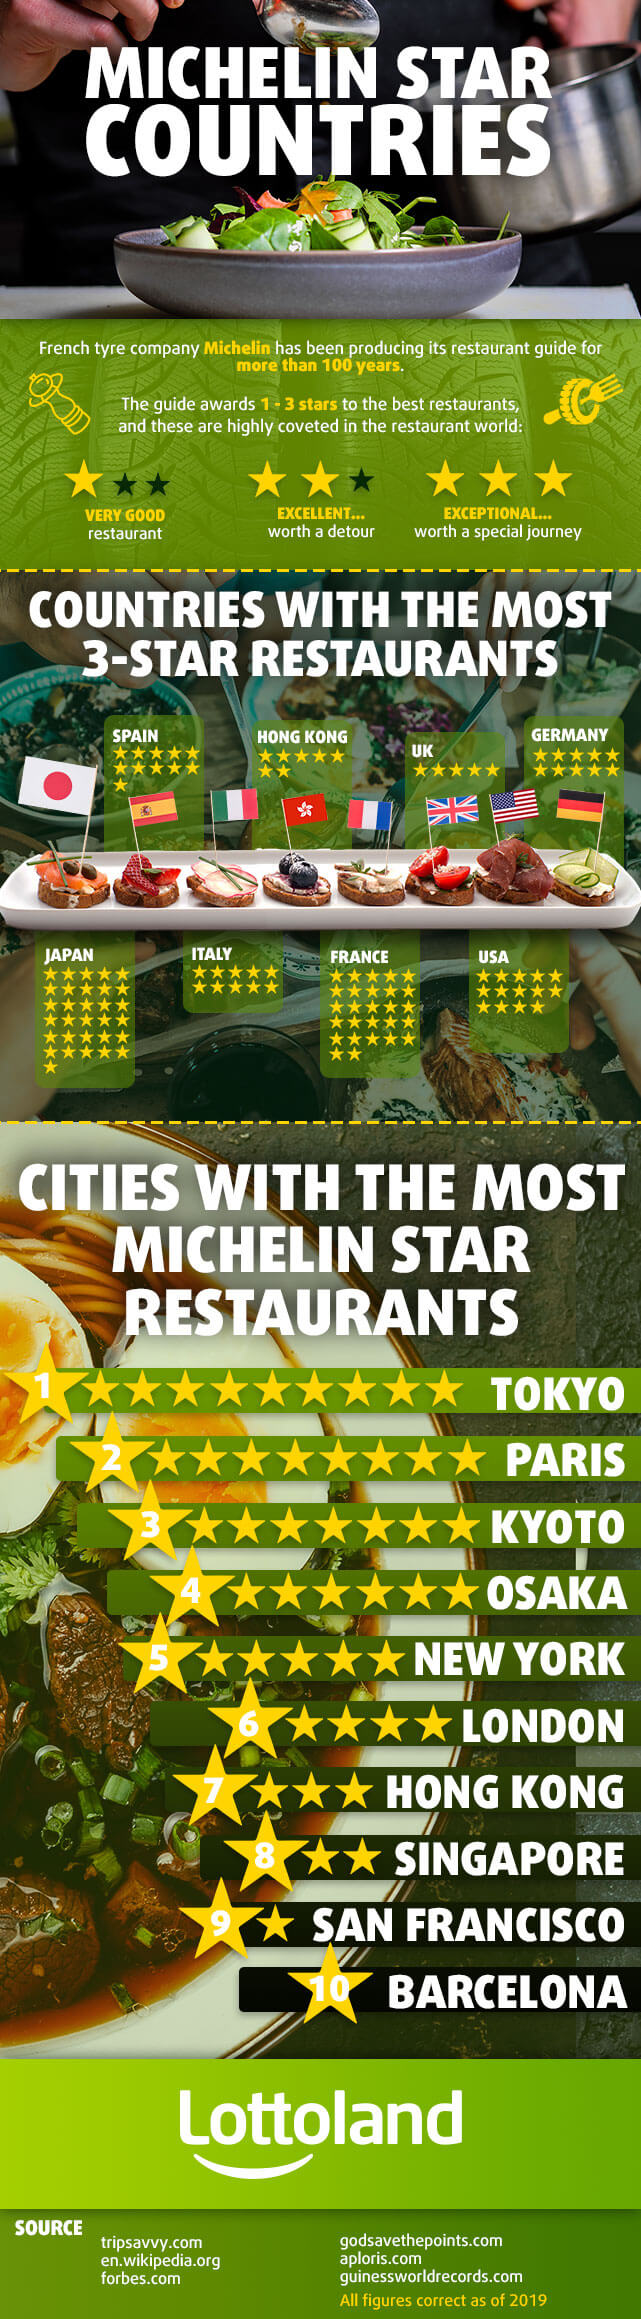 Infographic showing countries and cities around the world with the most Michelin starred restaurants